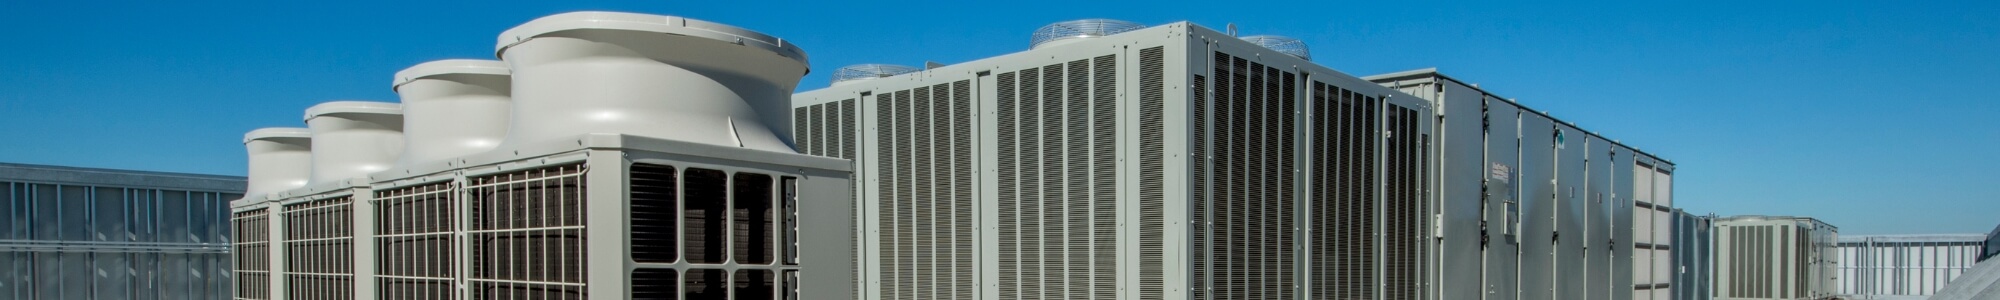 HVAC services in Mississauga